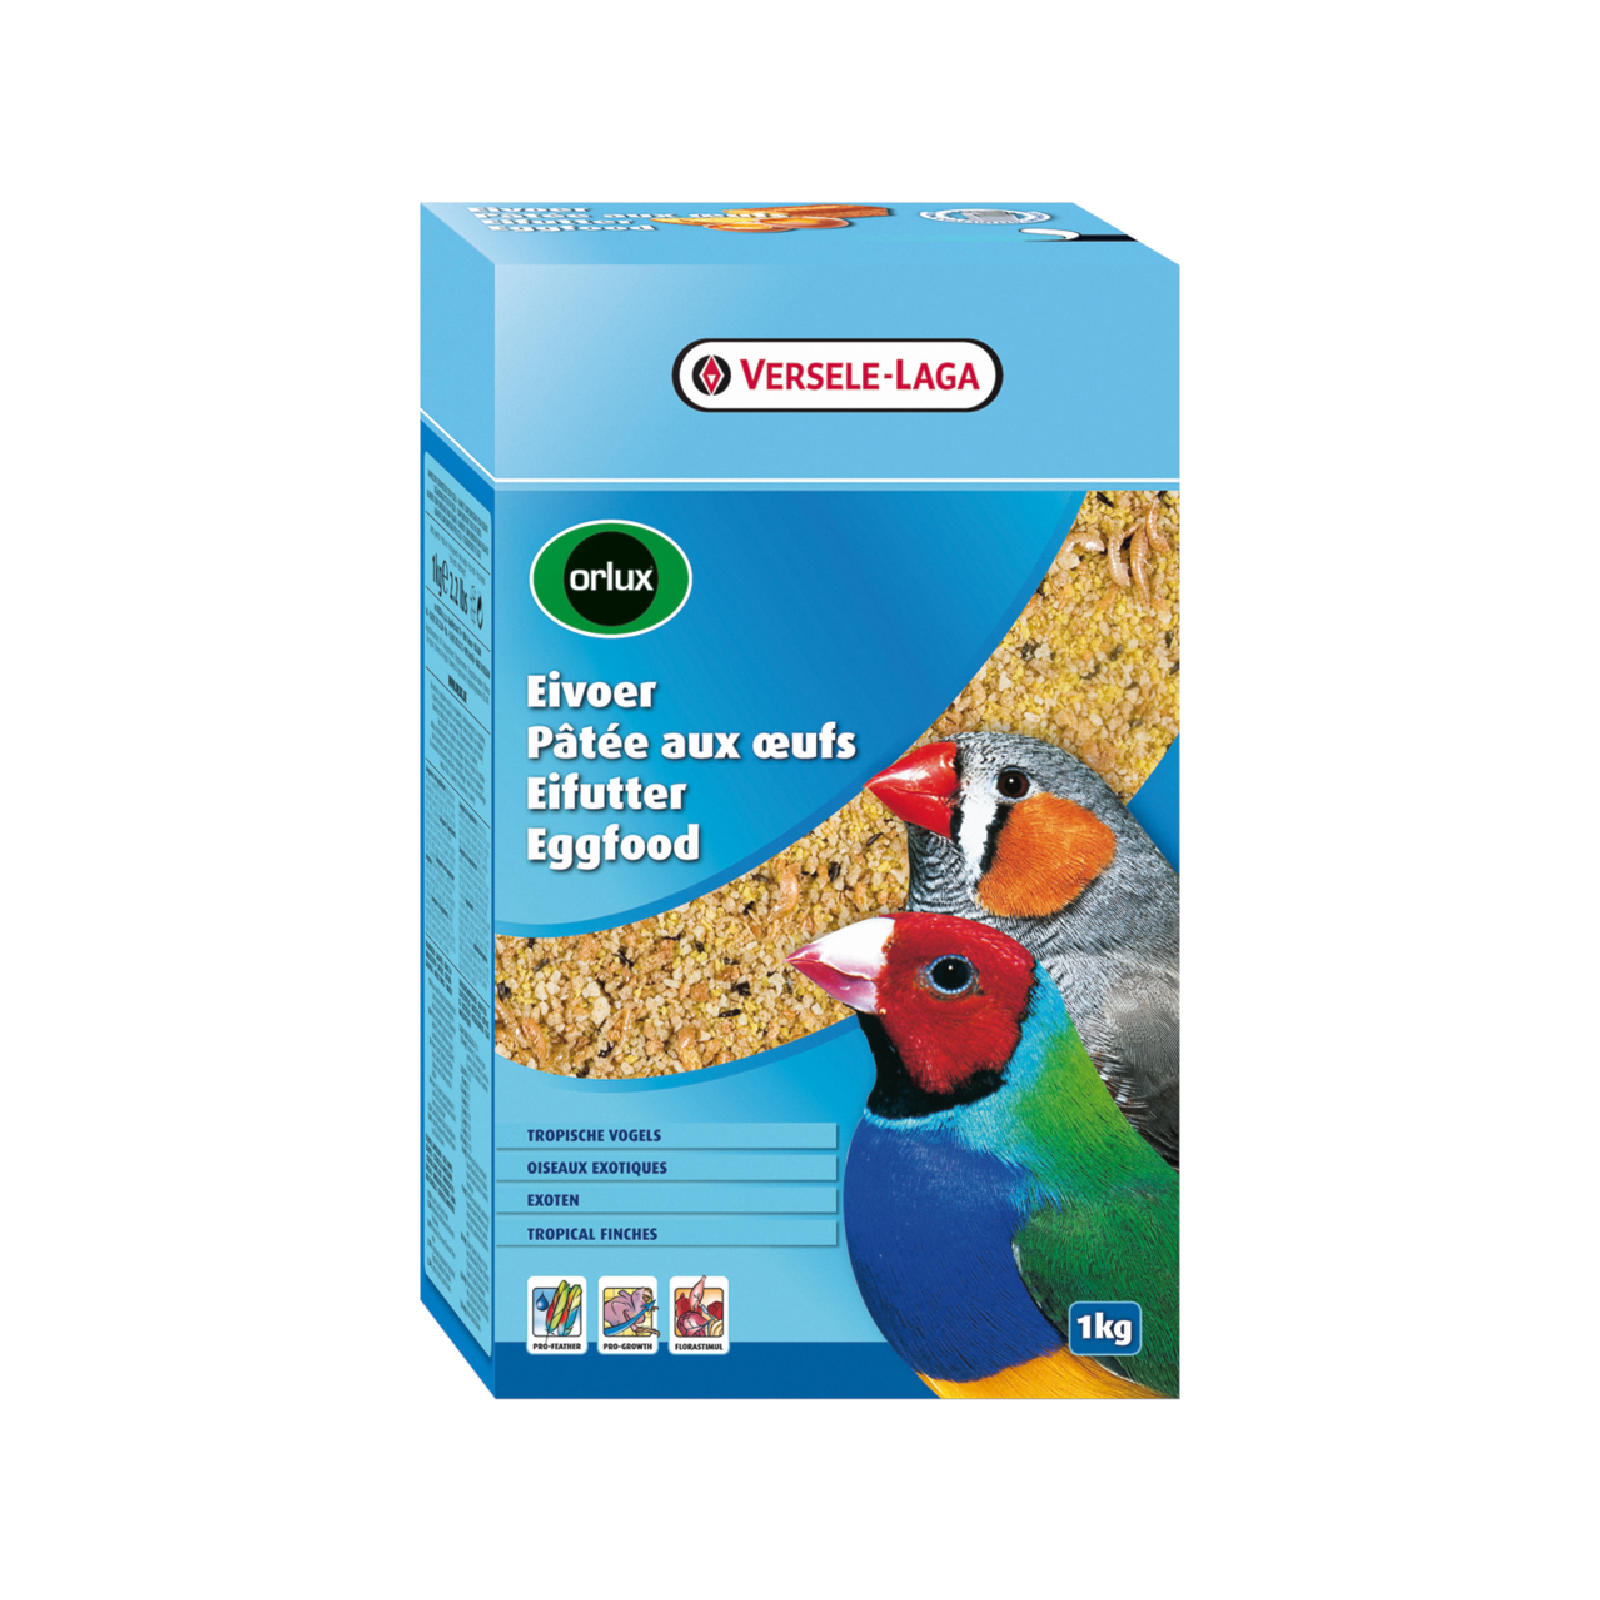 Orlux Eggfood - Dry Tropical Finches 1kg